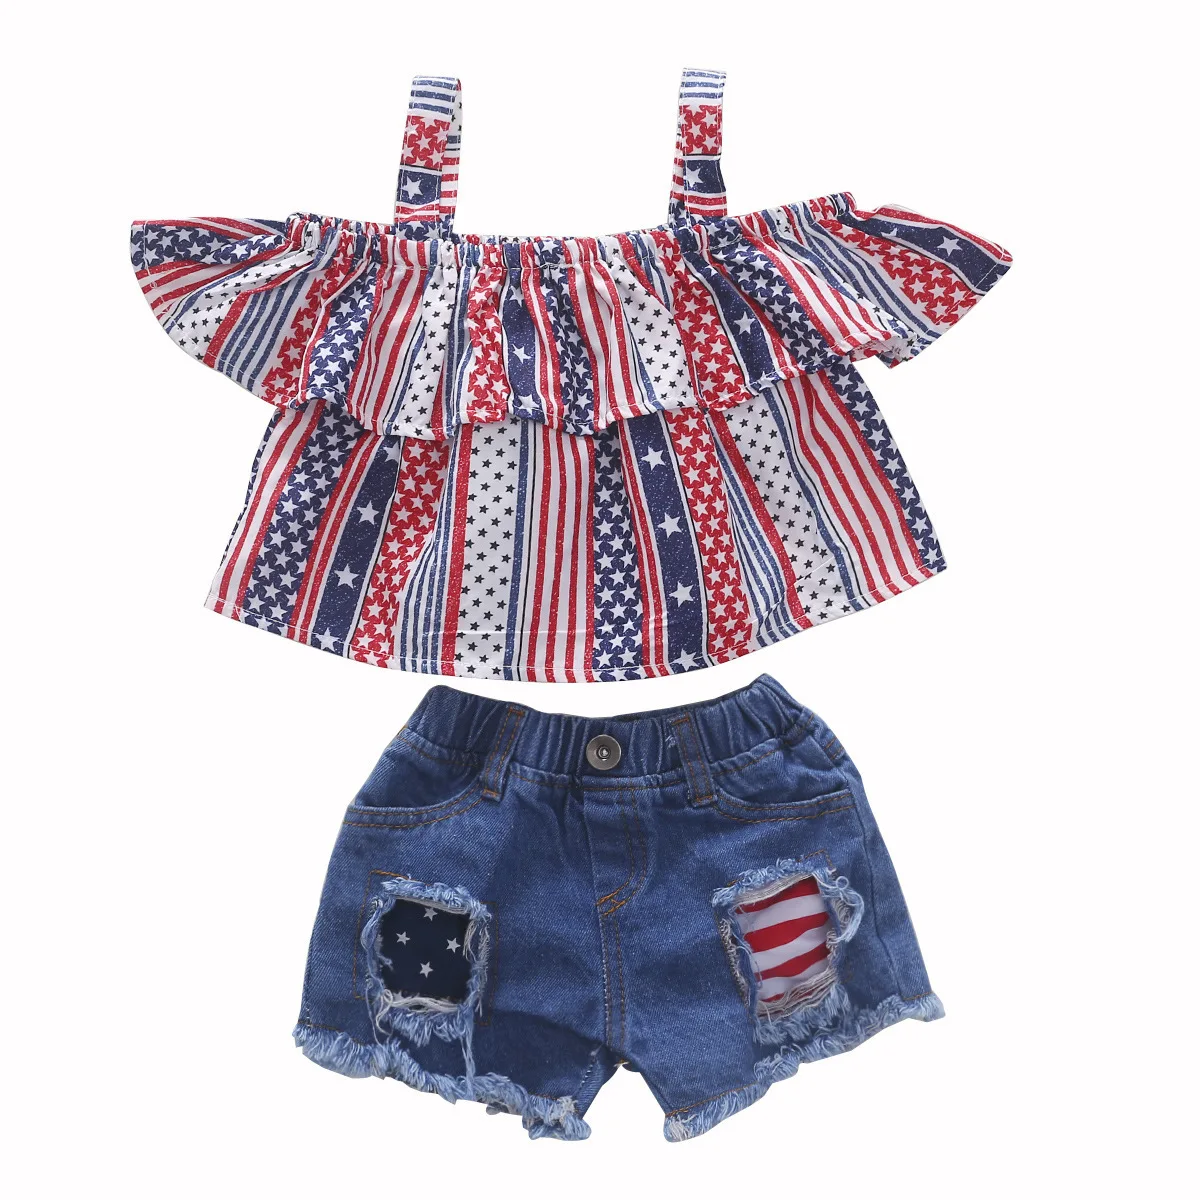 

OEM vetements pour enfants summer young little 2 pieces boutique cotton stylish outfit youth teen girls clothing sets 2020